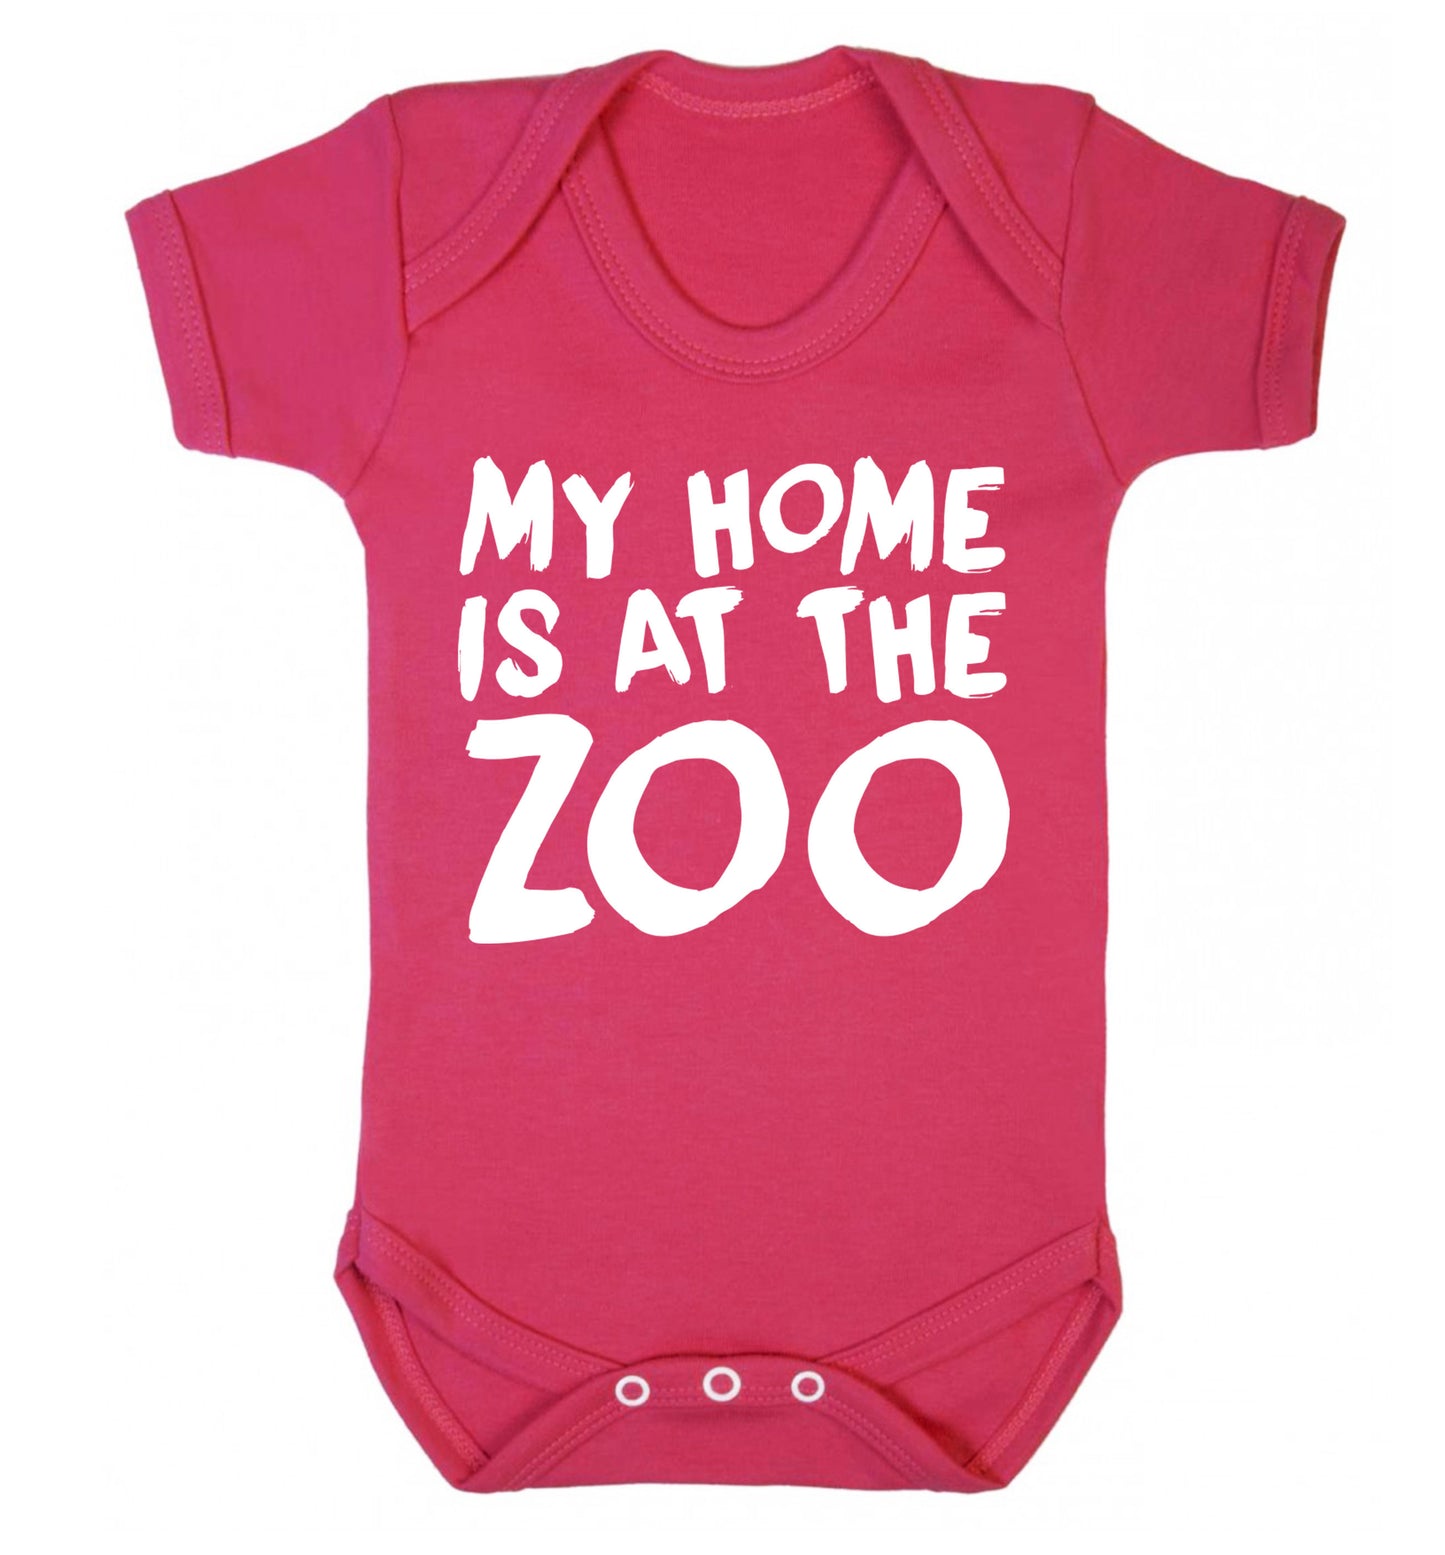 My home is at the zoo Baby Vest dark pink 18-24 months